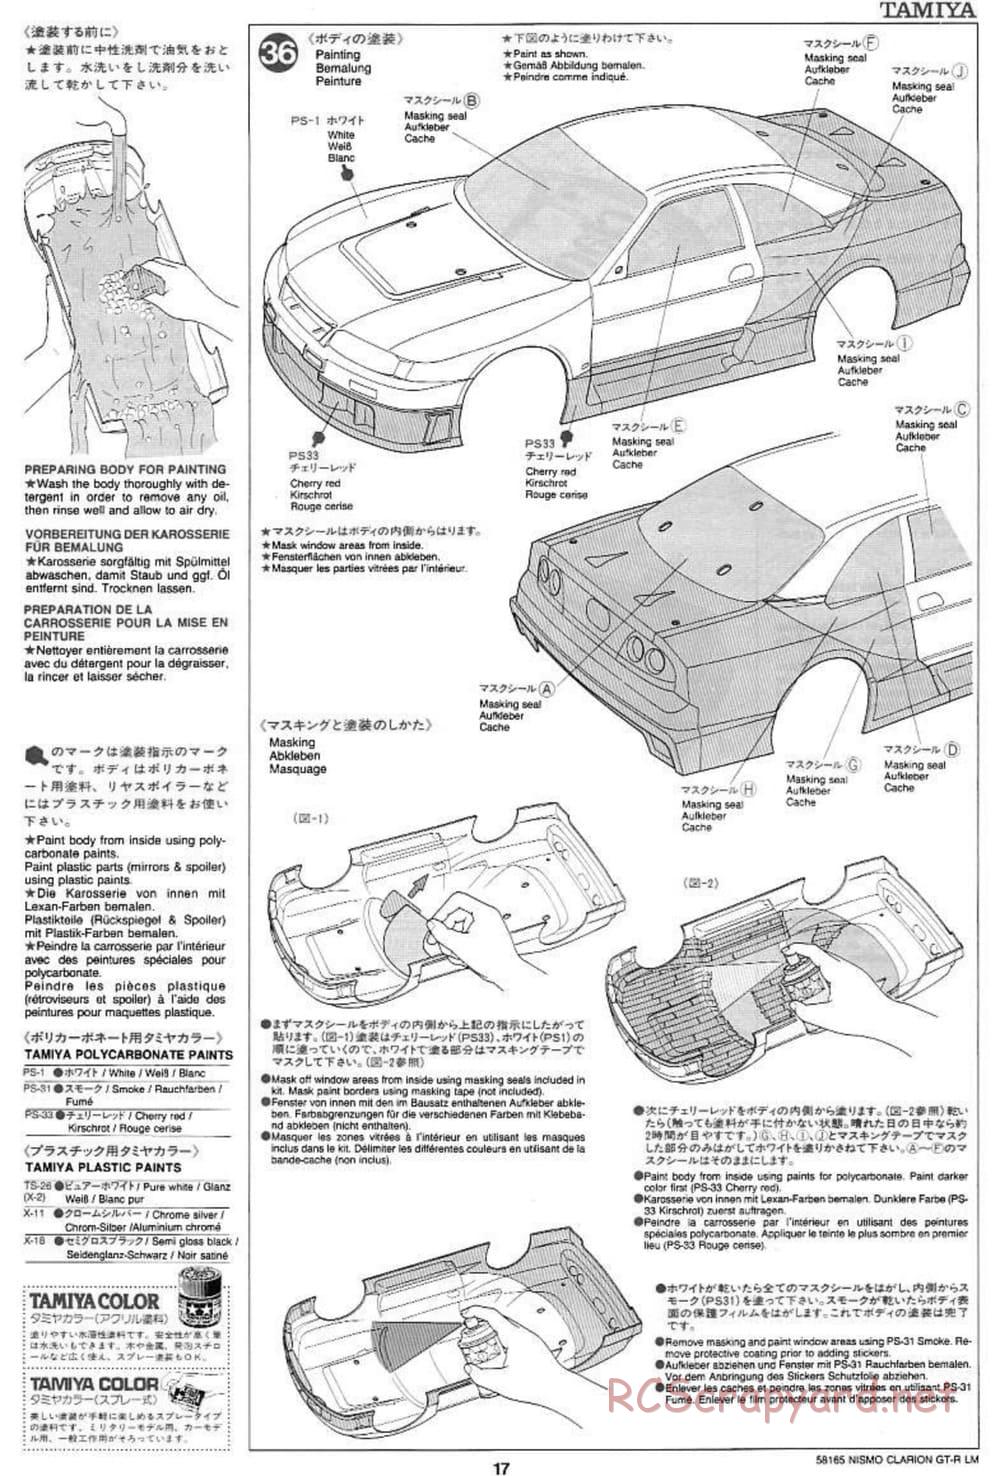 Tamiya - Nismo Clarion GT-R LM - TA-02W Chassis - Manual - Page 17